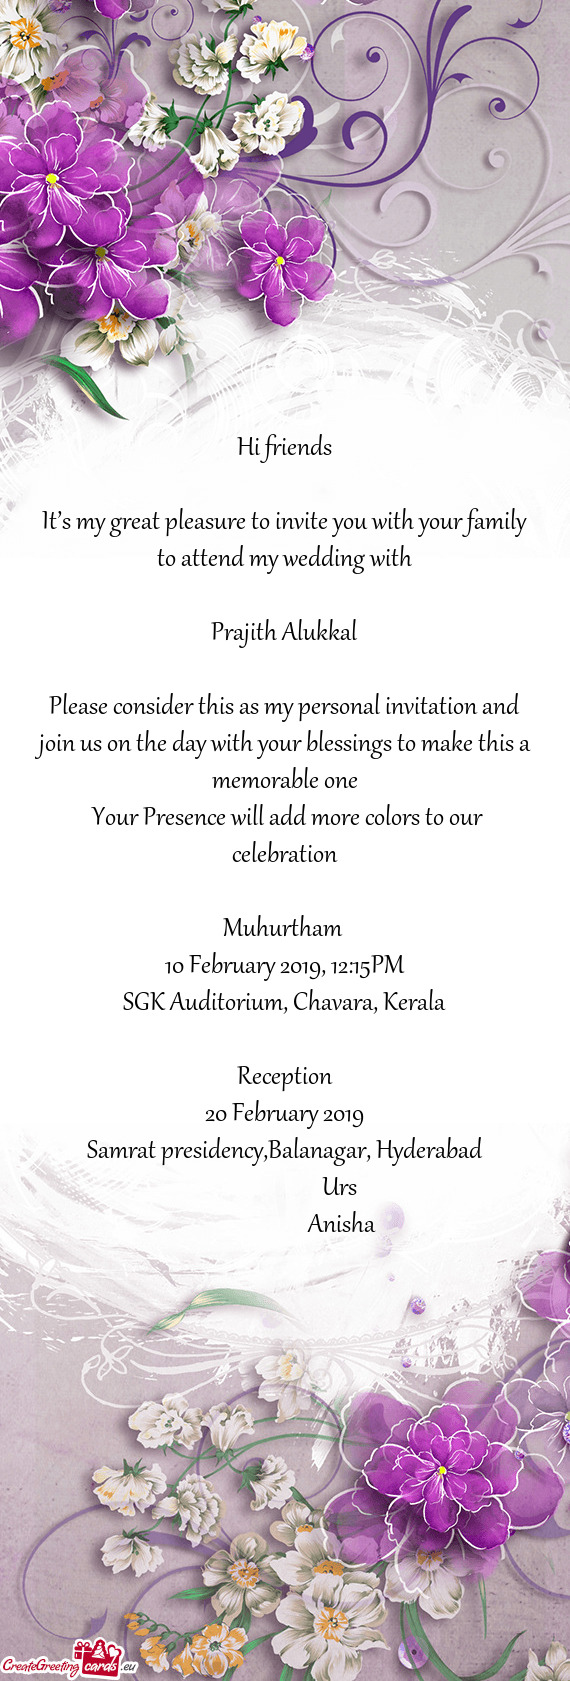 Hi friends
 
 It’s my great pleasure to invite you with your family to attend my wedding with
 
 P